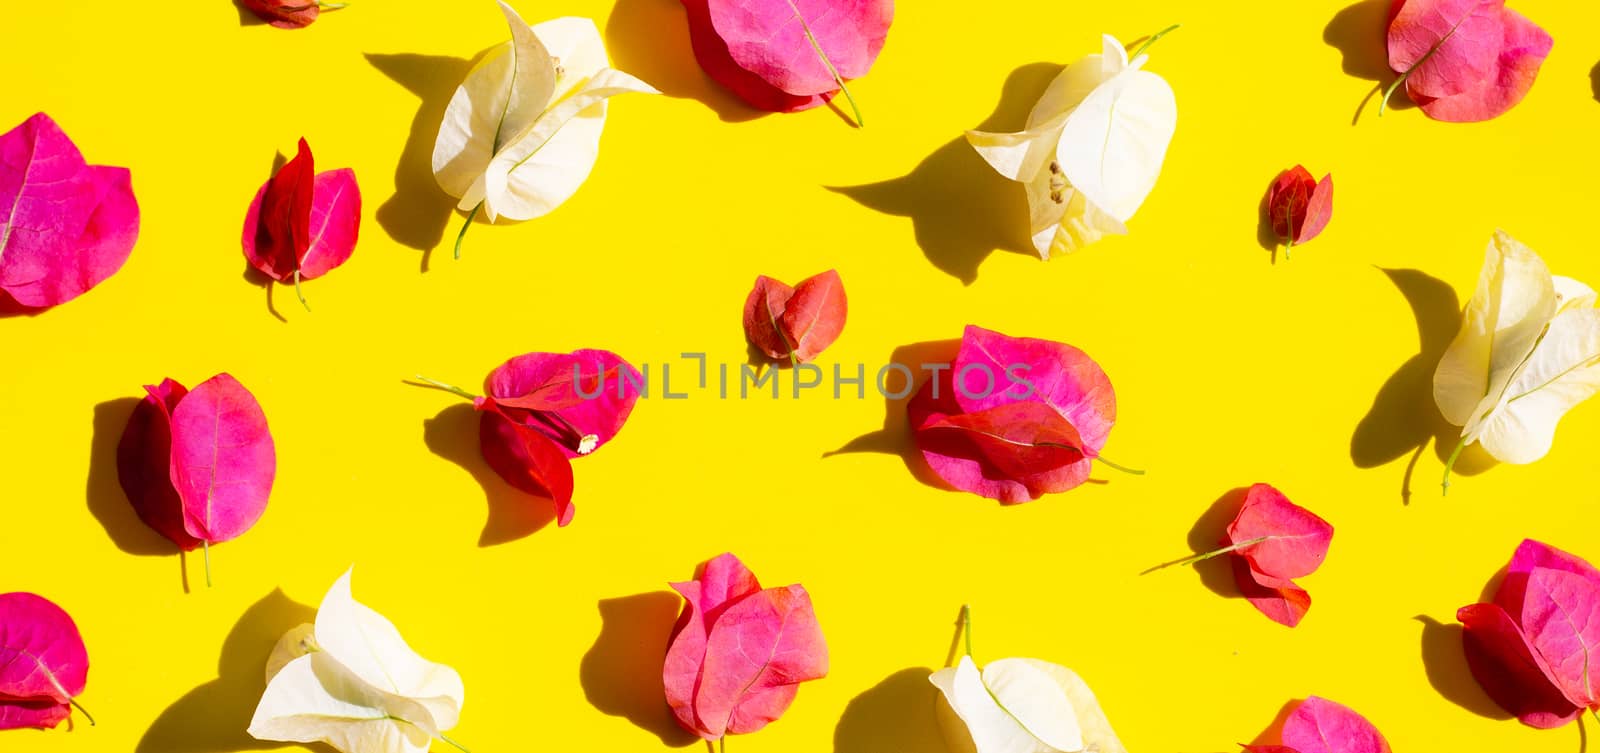 Beautiful red and white bougainvillea flower on yellow backgroun by Bowonpat